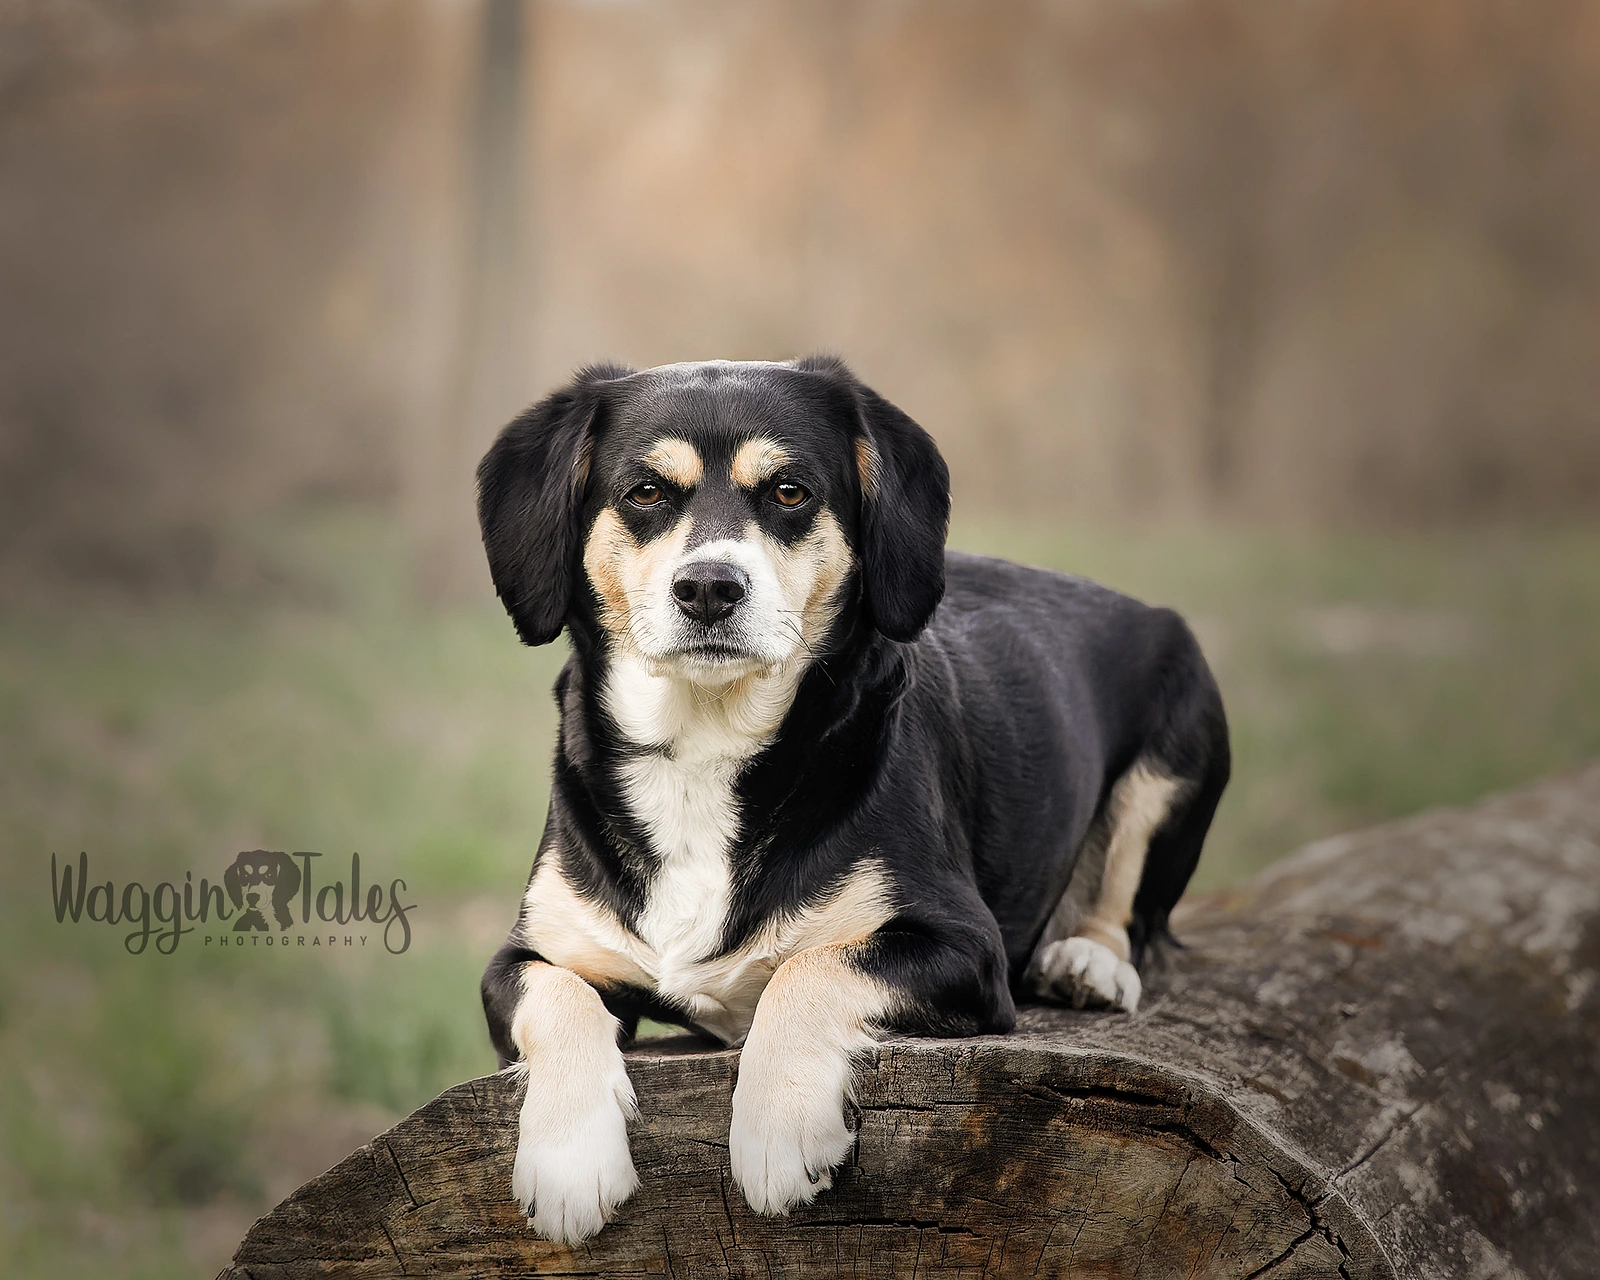 Waggin' Tales  Photography